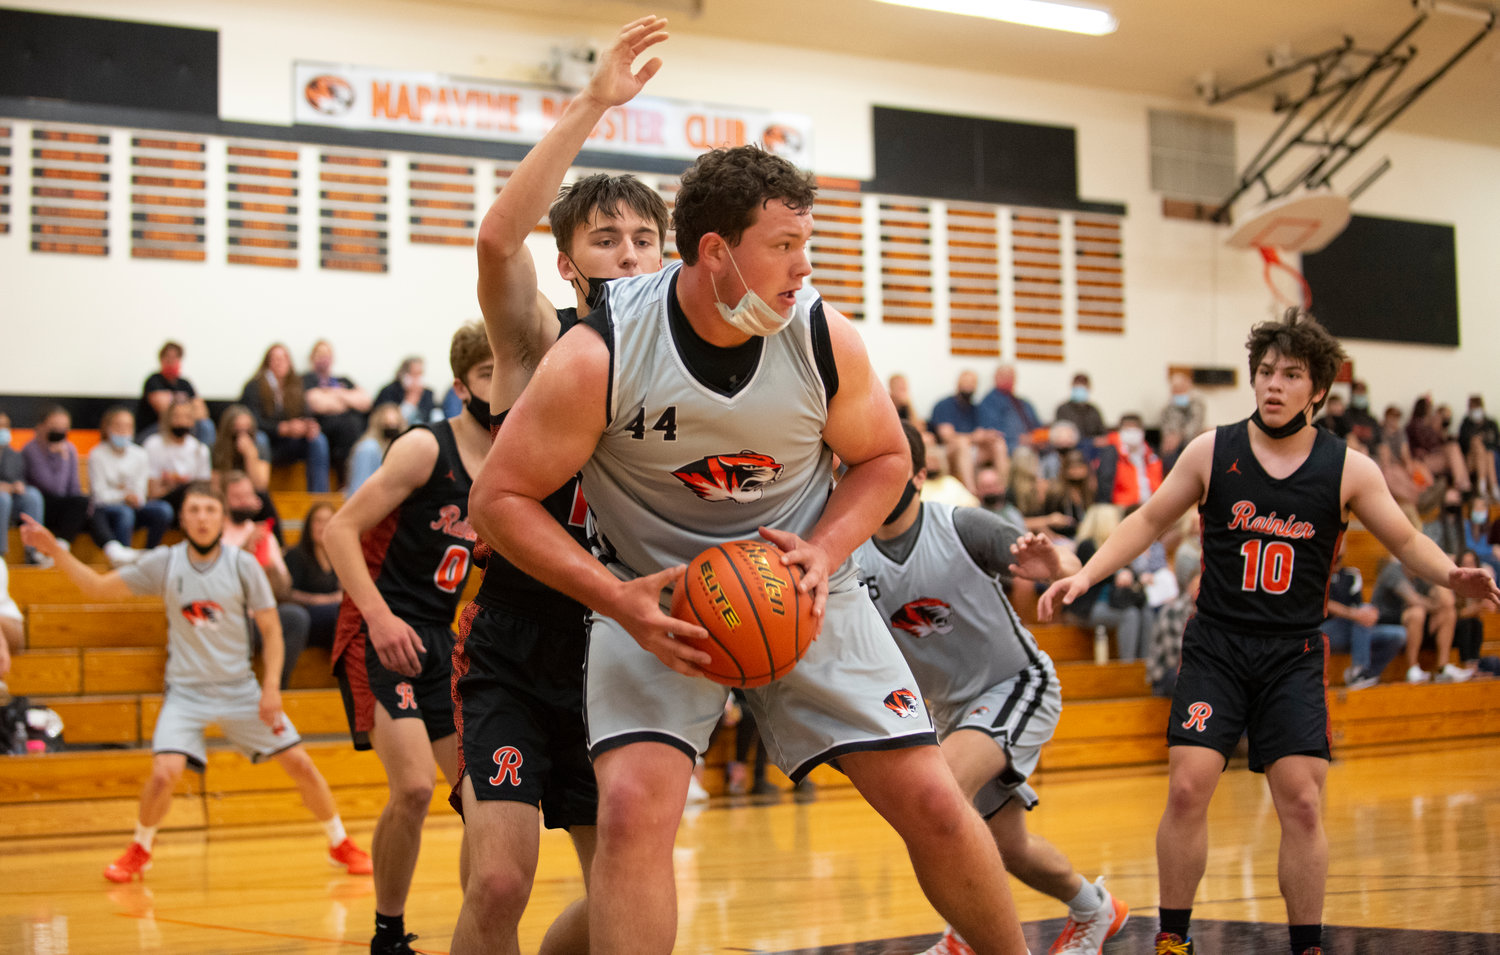 Napavine junior Keith Olson was named to the all-Central 2B League boys basketball first team on June 14, 2021.